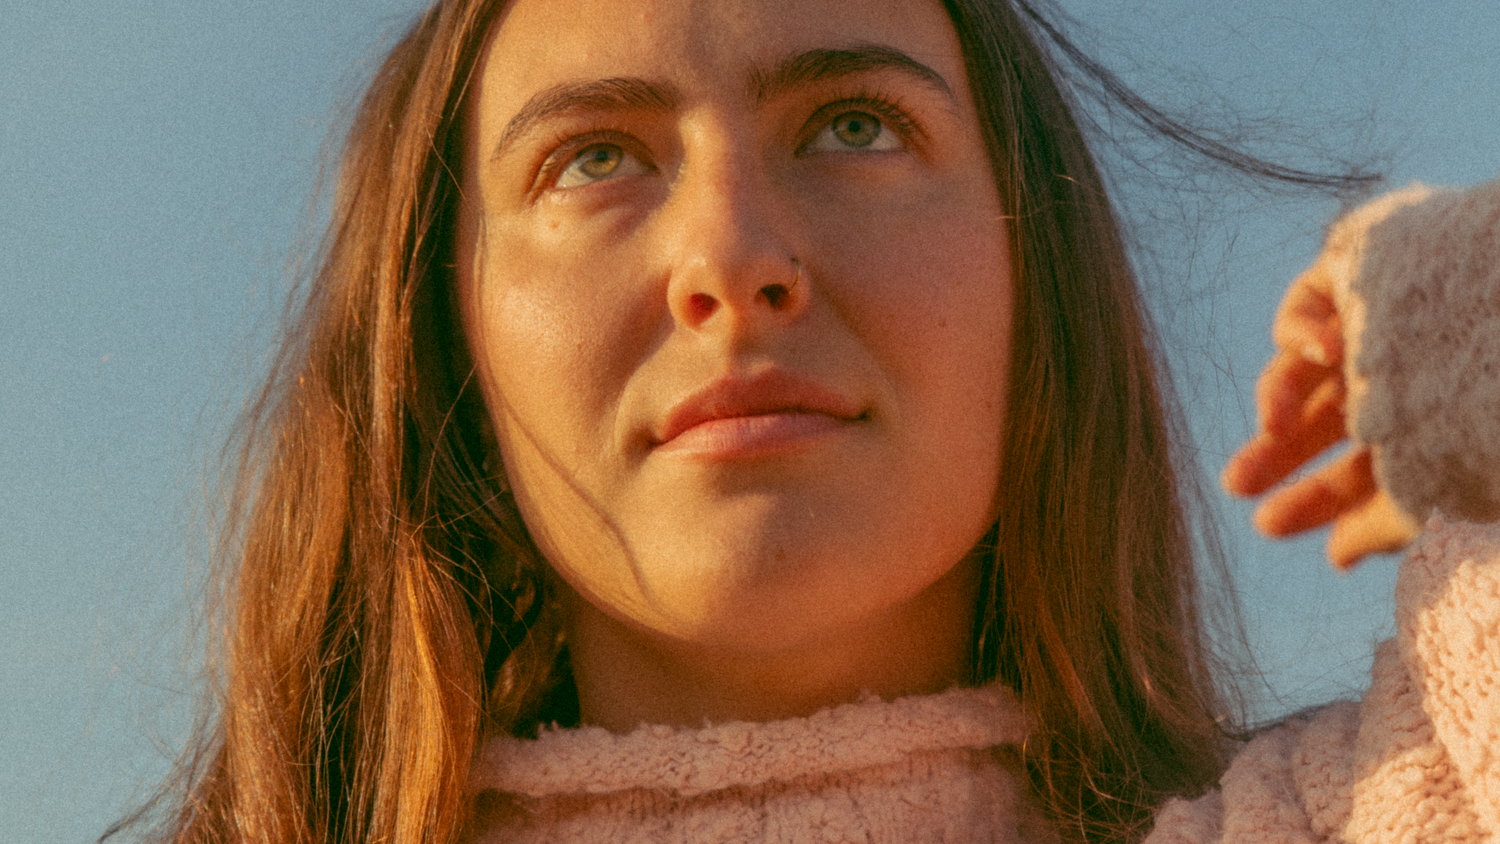 Close Up Face shot of model Lau who is looking upward into the distance, while brushing her right hand through her hair. She is wearing a pink knitted turtle-neck sweater and the background is blue sky.